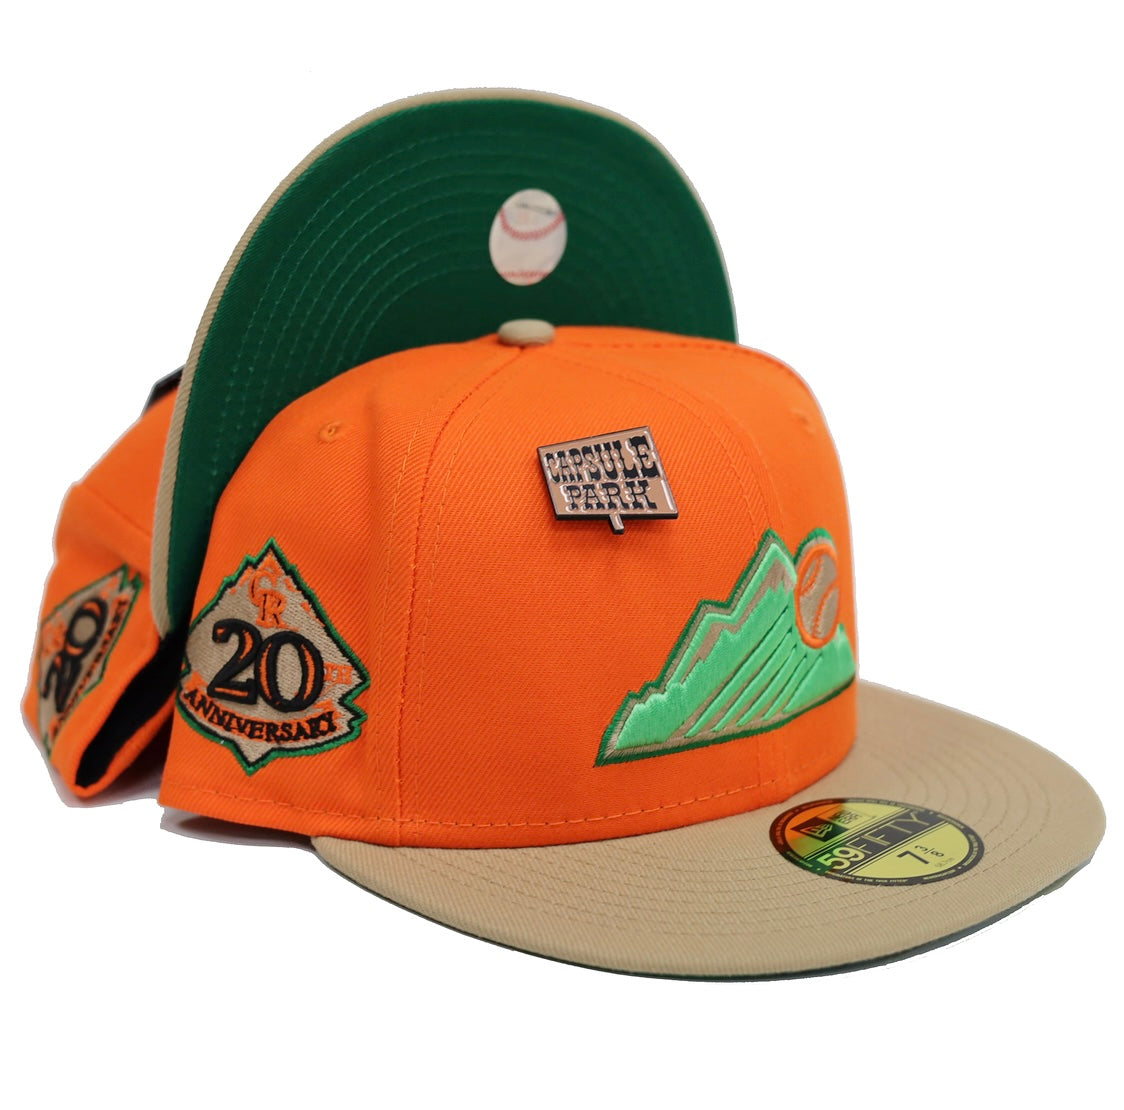 New Era Colorado Rockies Capsule Park Collection 1998 All Star Game 59Fifty Fitted Hat Brown/Blue